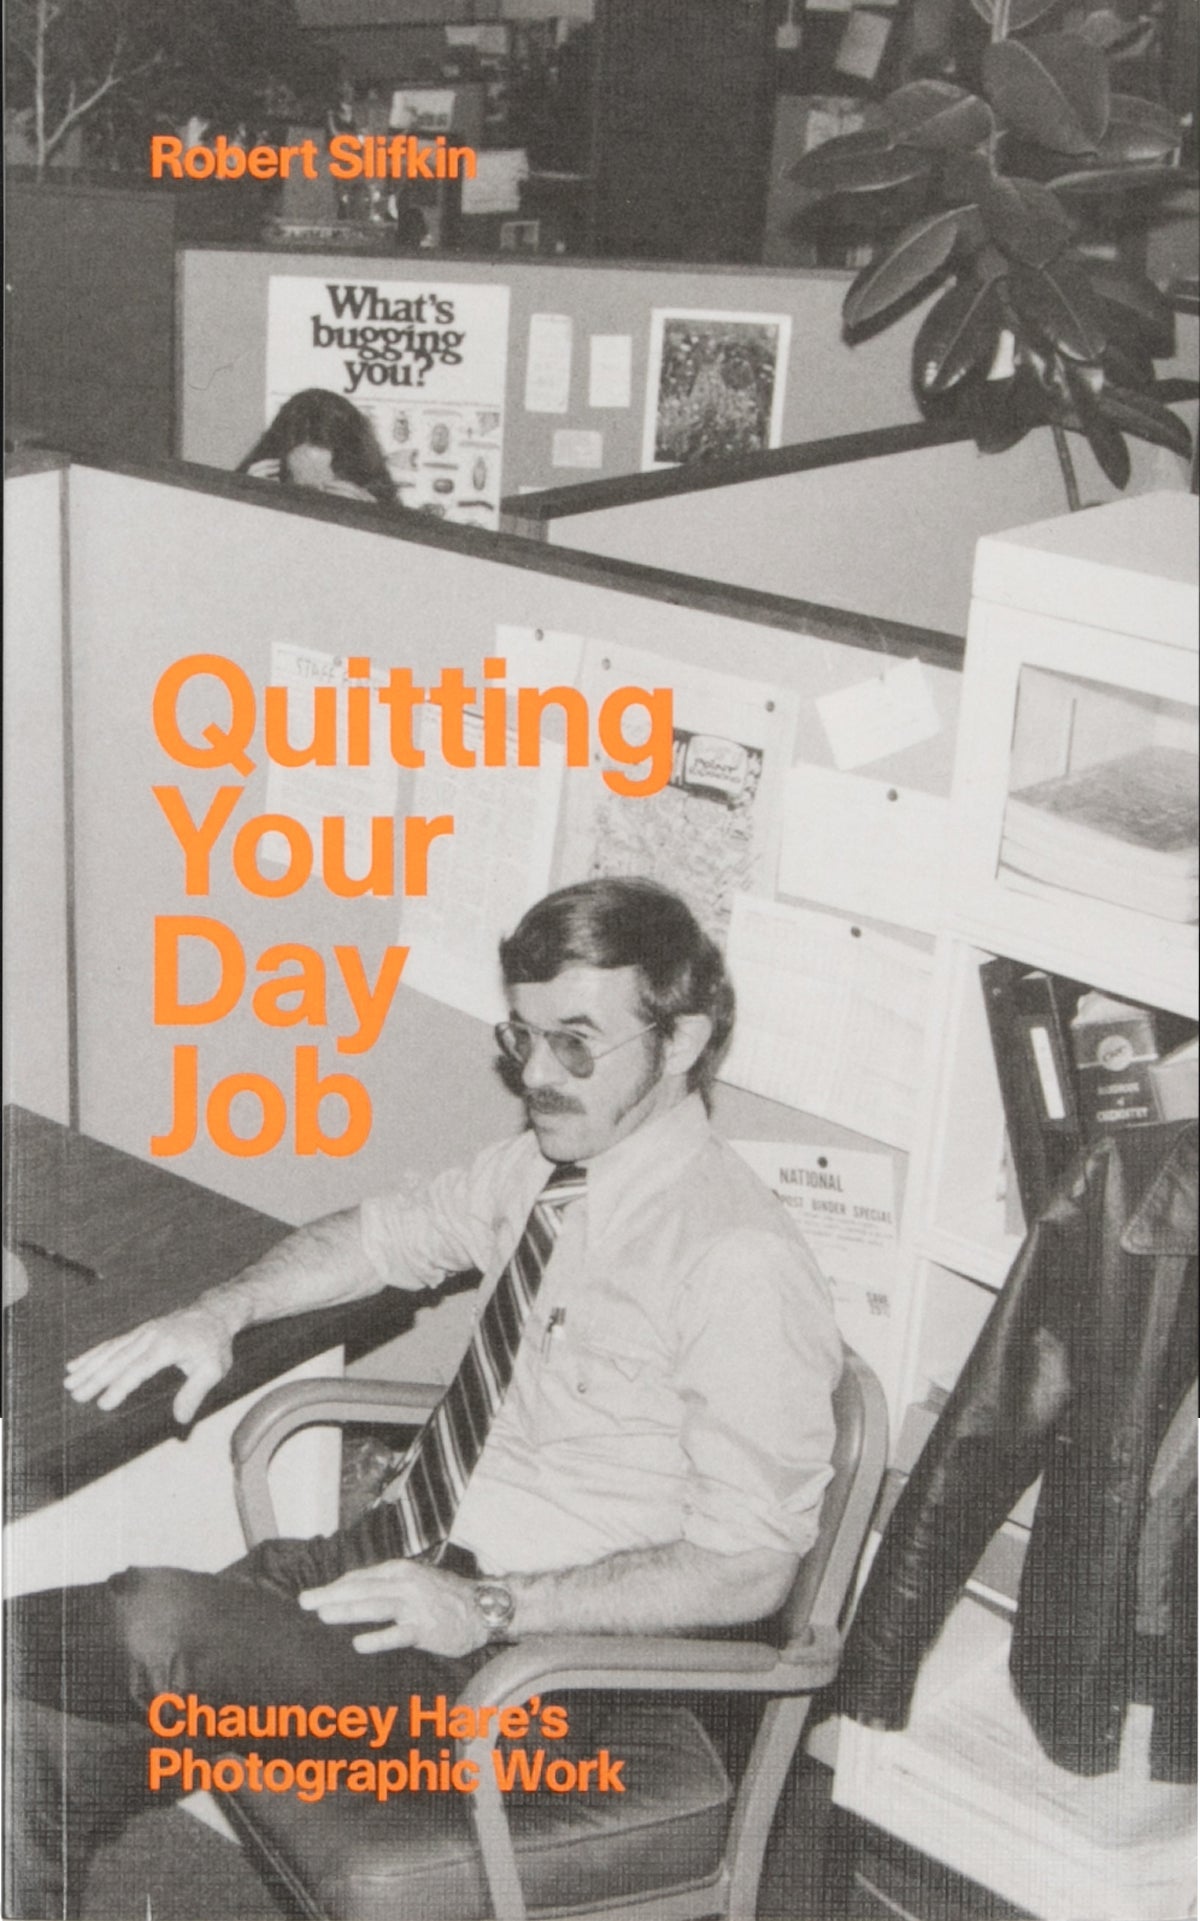 Quitting Your Day Job: Chauncey Hare’s Photographic Work